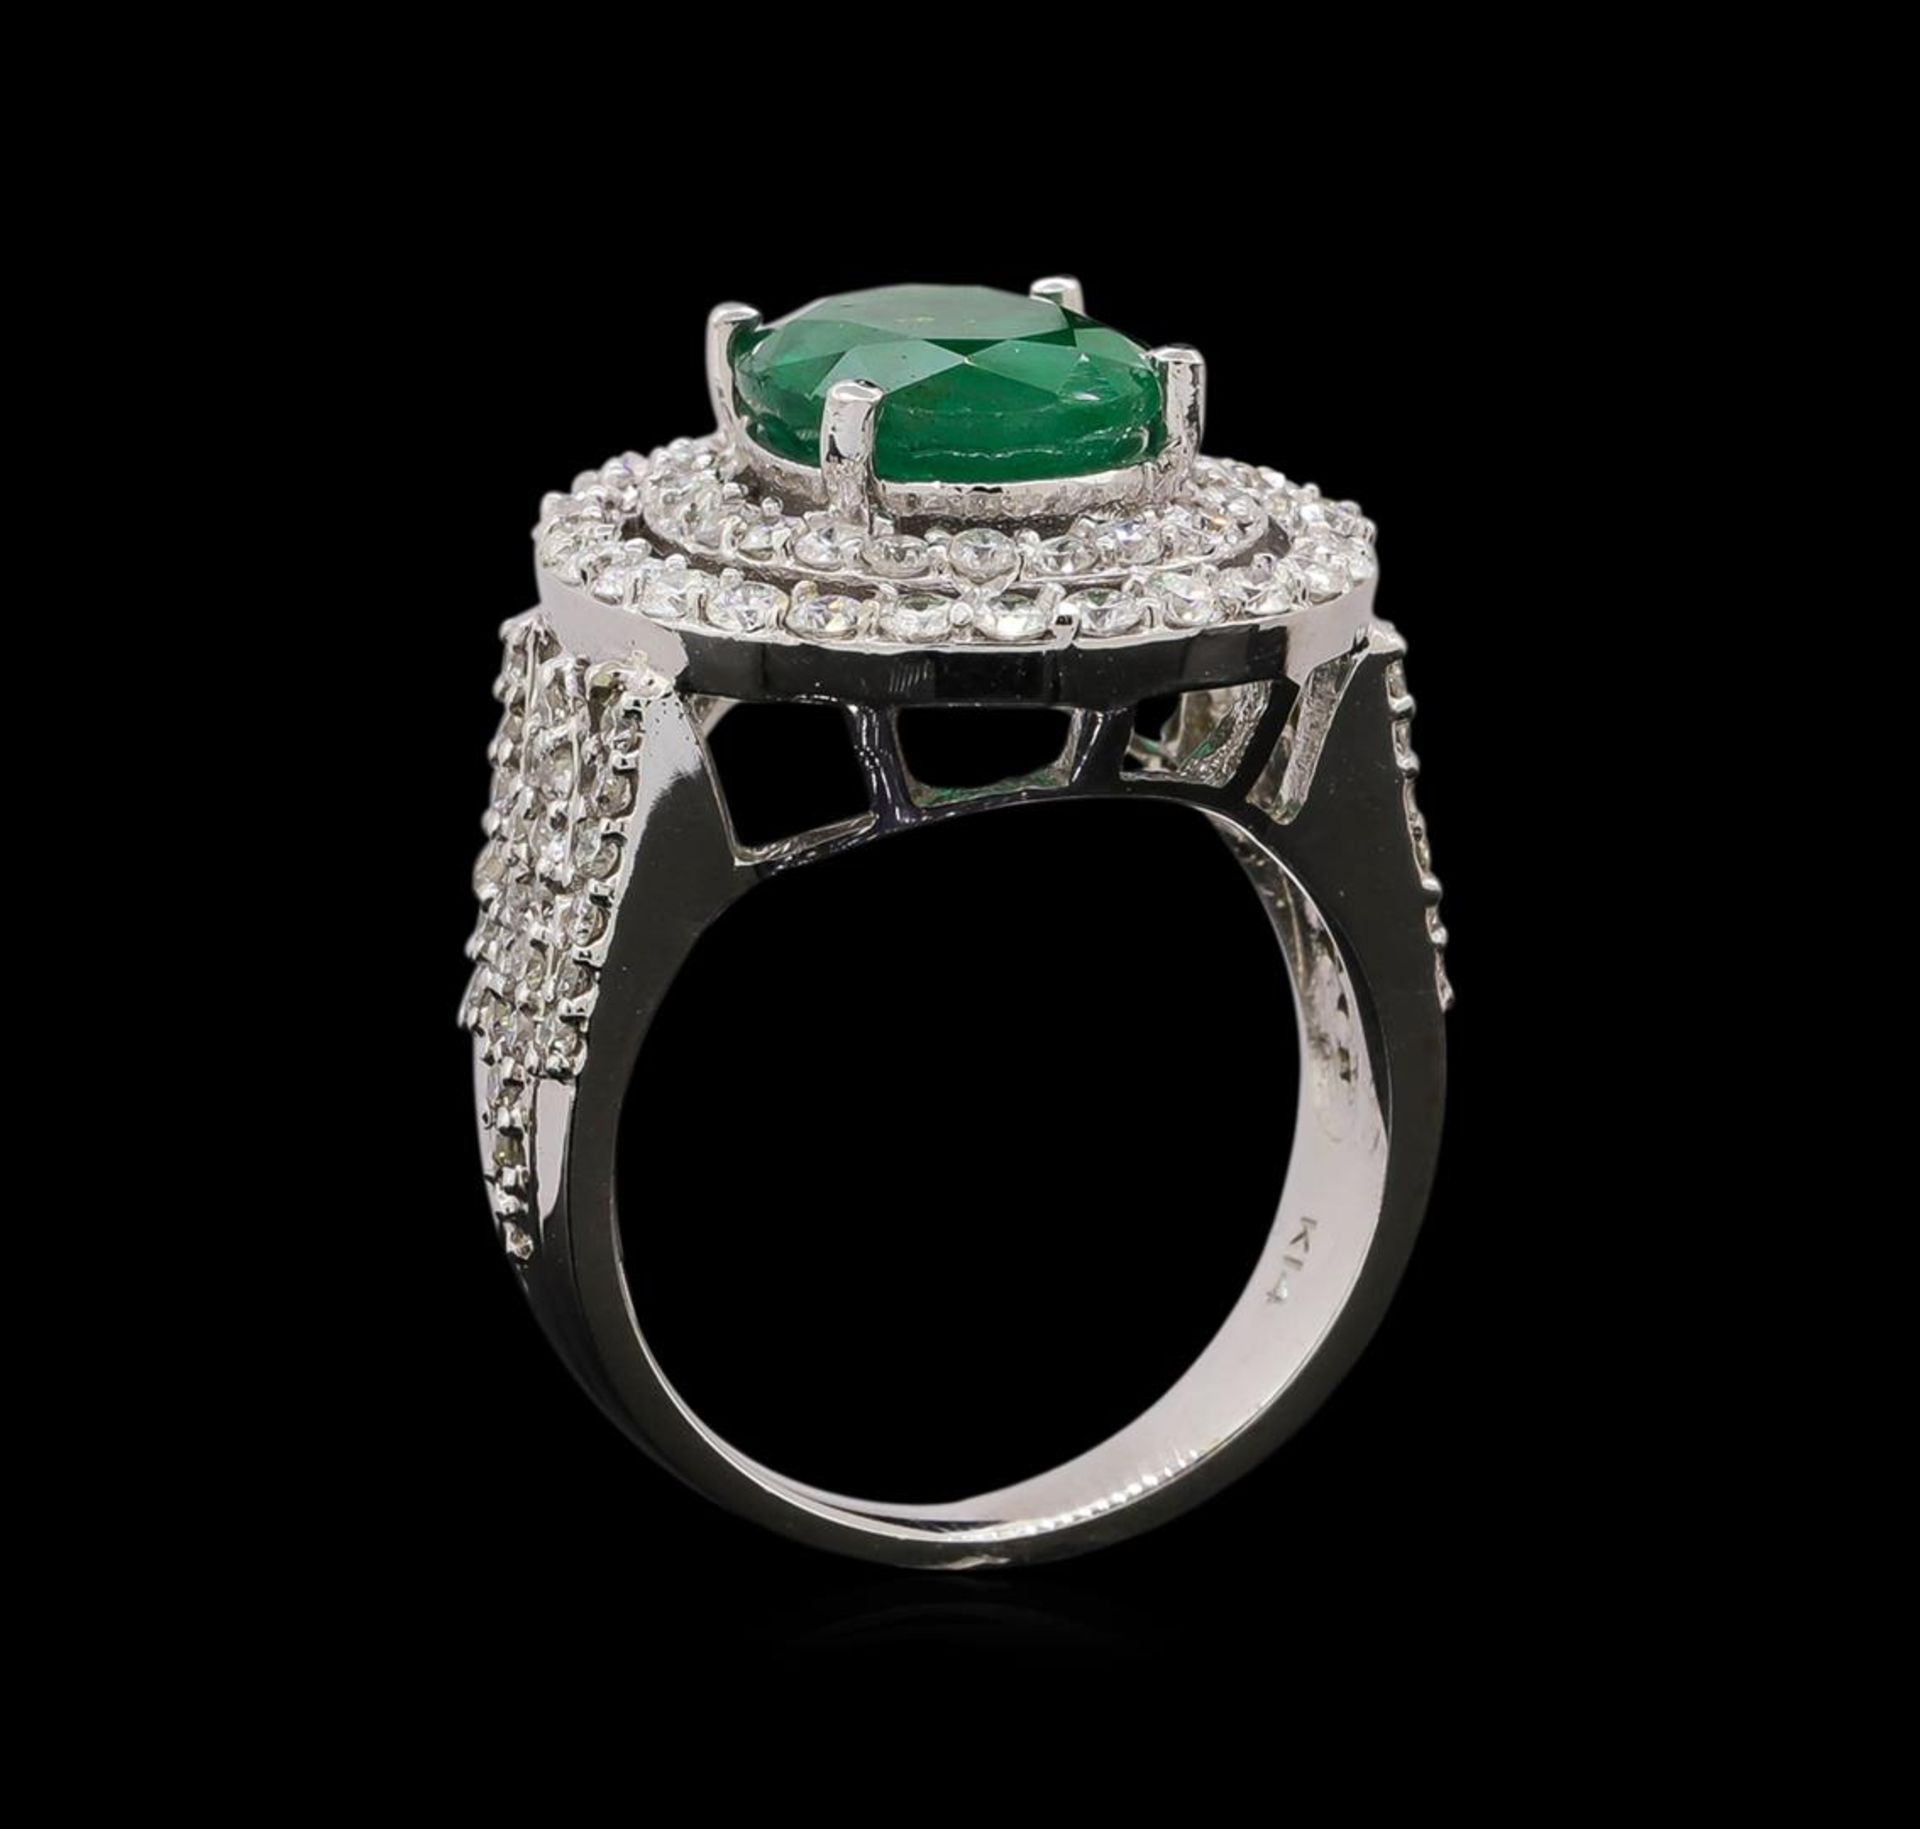 14KT White Gold 3.58 ctw Emerald and Diamond Ring - Image 4 of 5